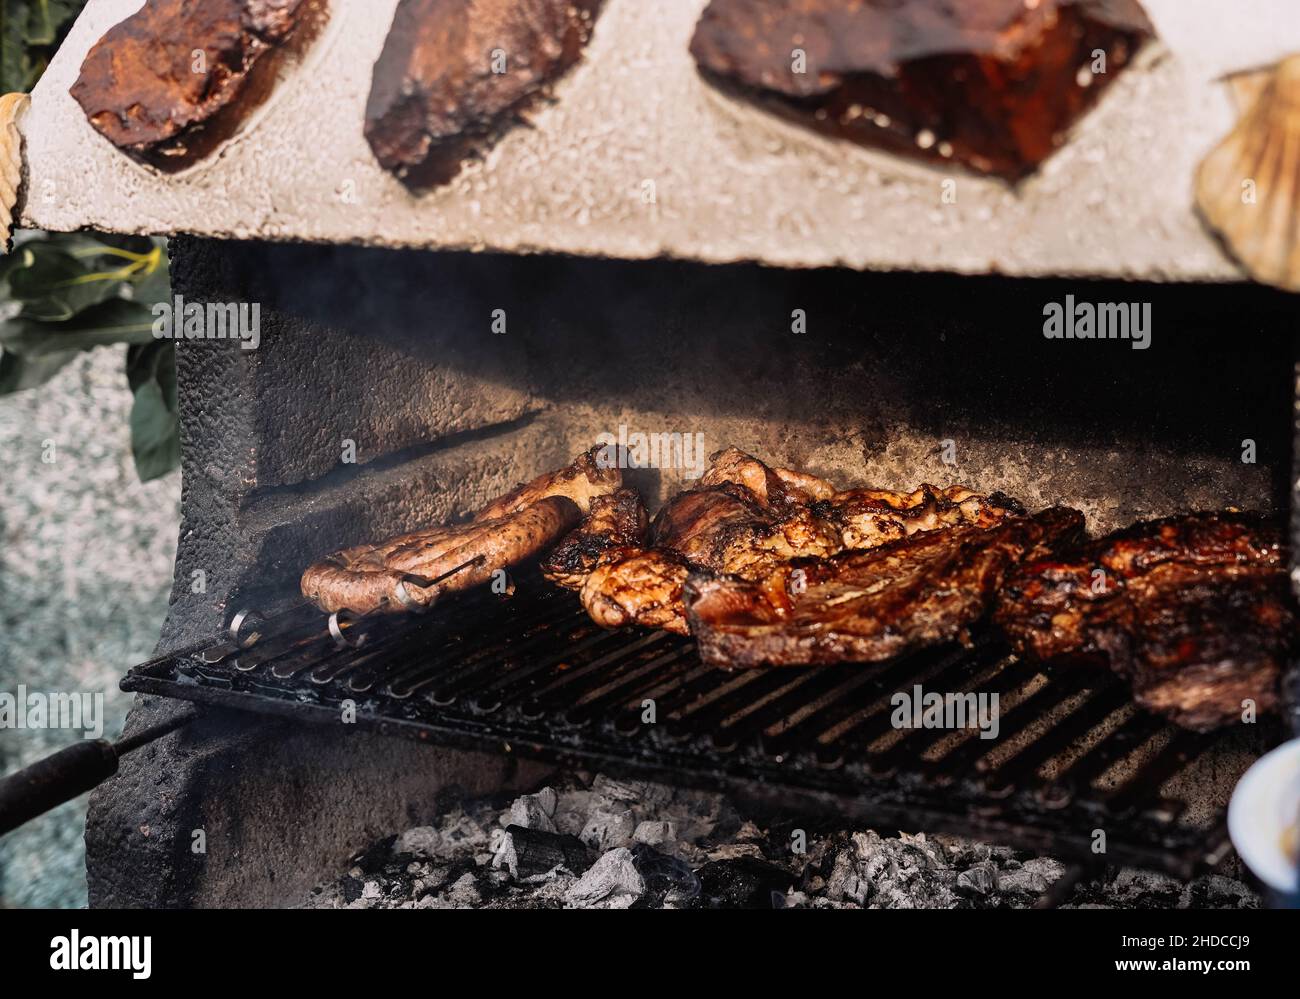 South American style barbecue with different cuts of veal Stock Photo